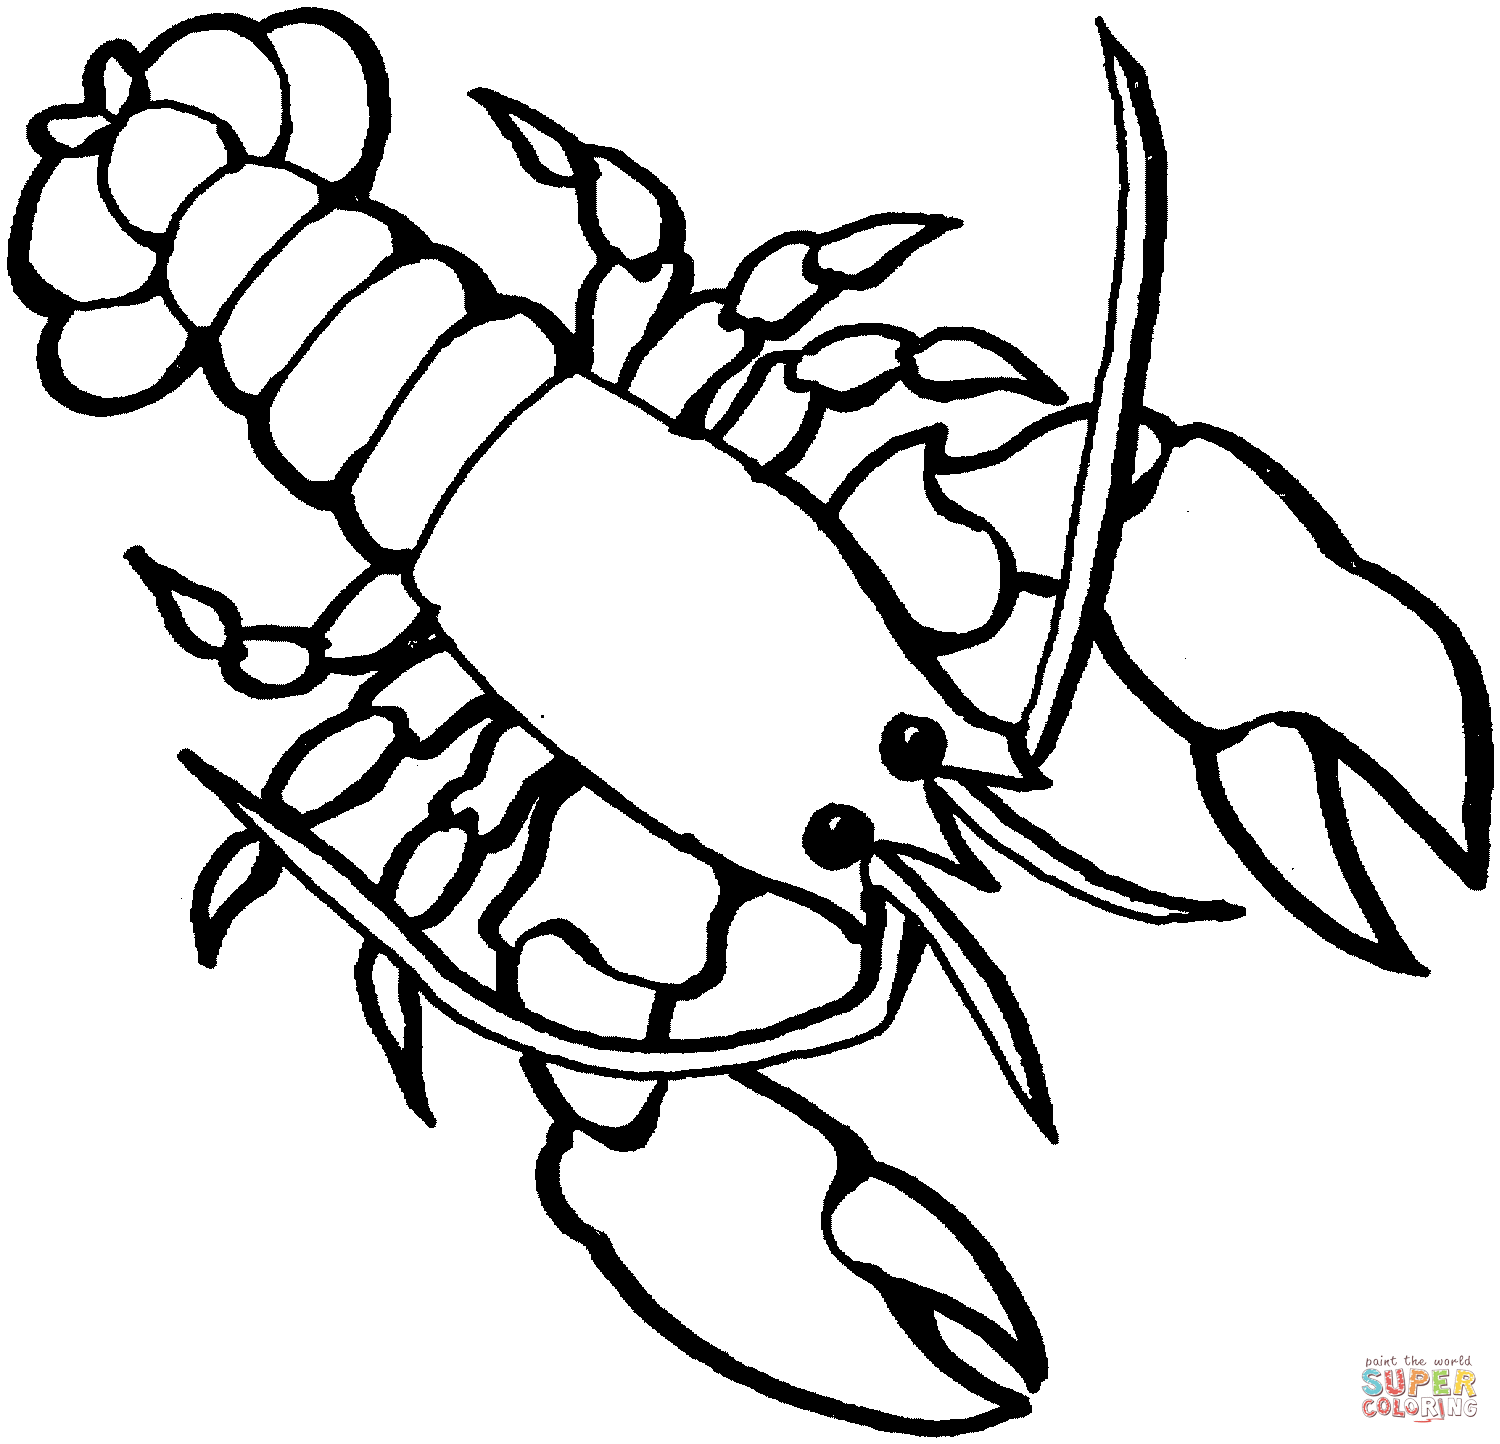 Lobster coloring page free printable coloring pages ocean coloring pages coloring pages printable coloring pages